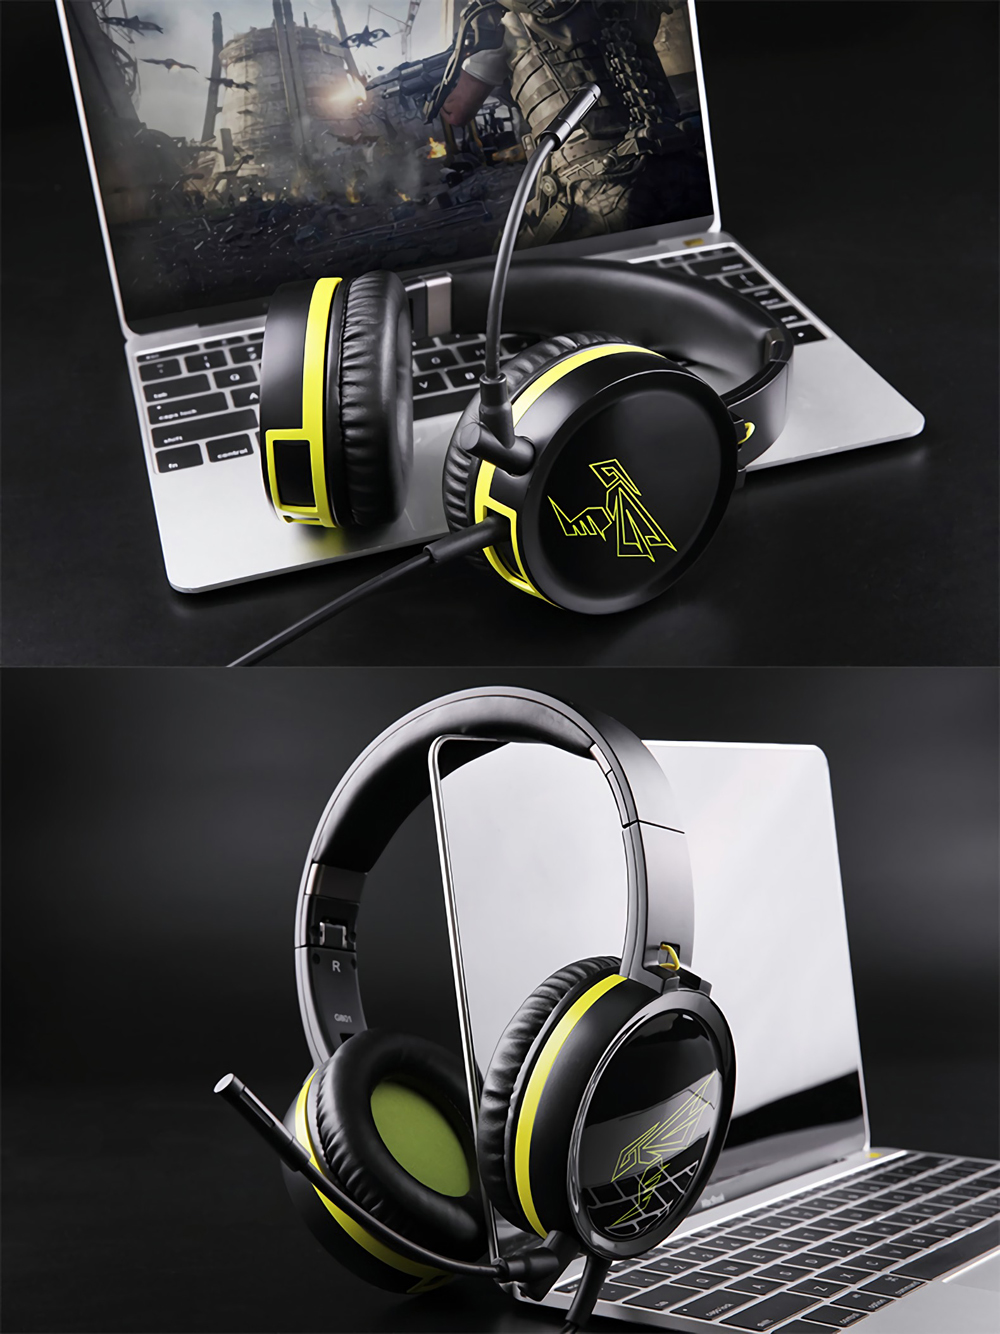 SOMiC G801 Portable Foldable 3.5mm Auido Gaming Headset Headphone with Removable Microphone 66